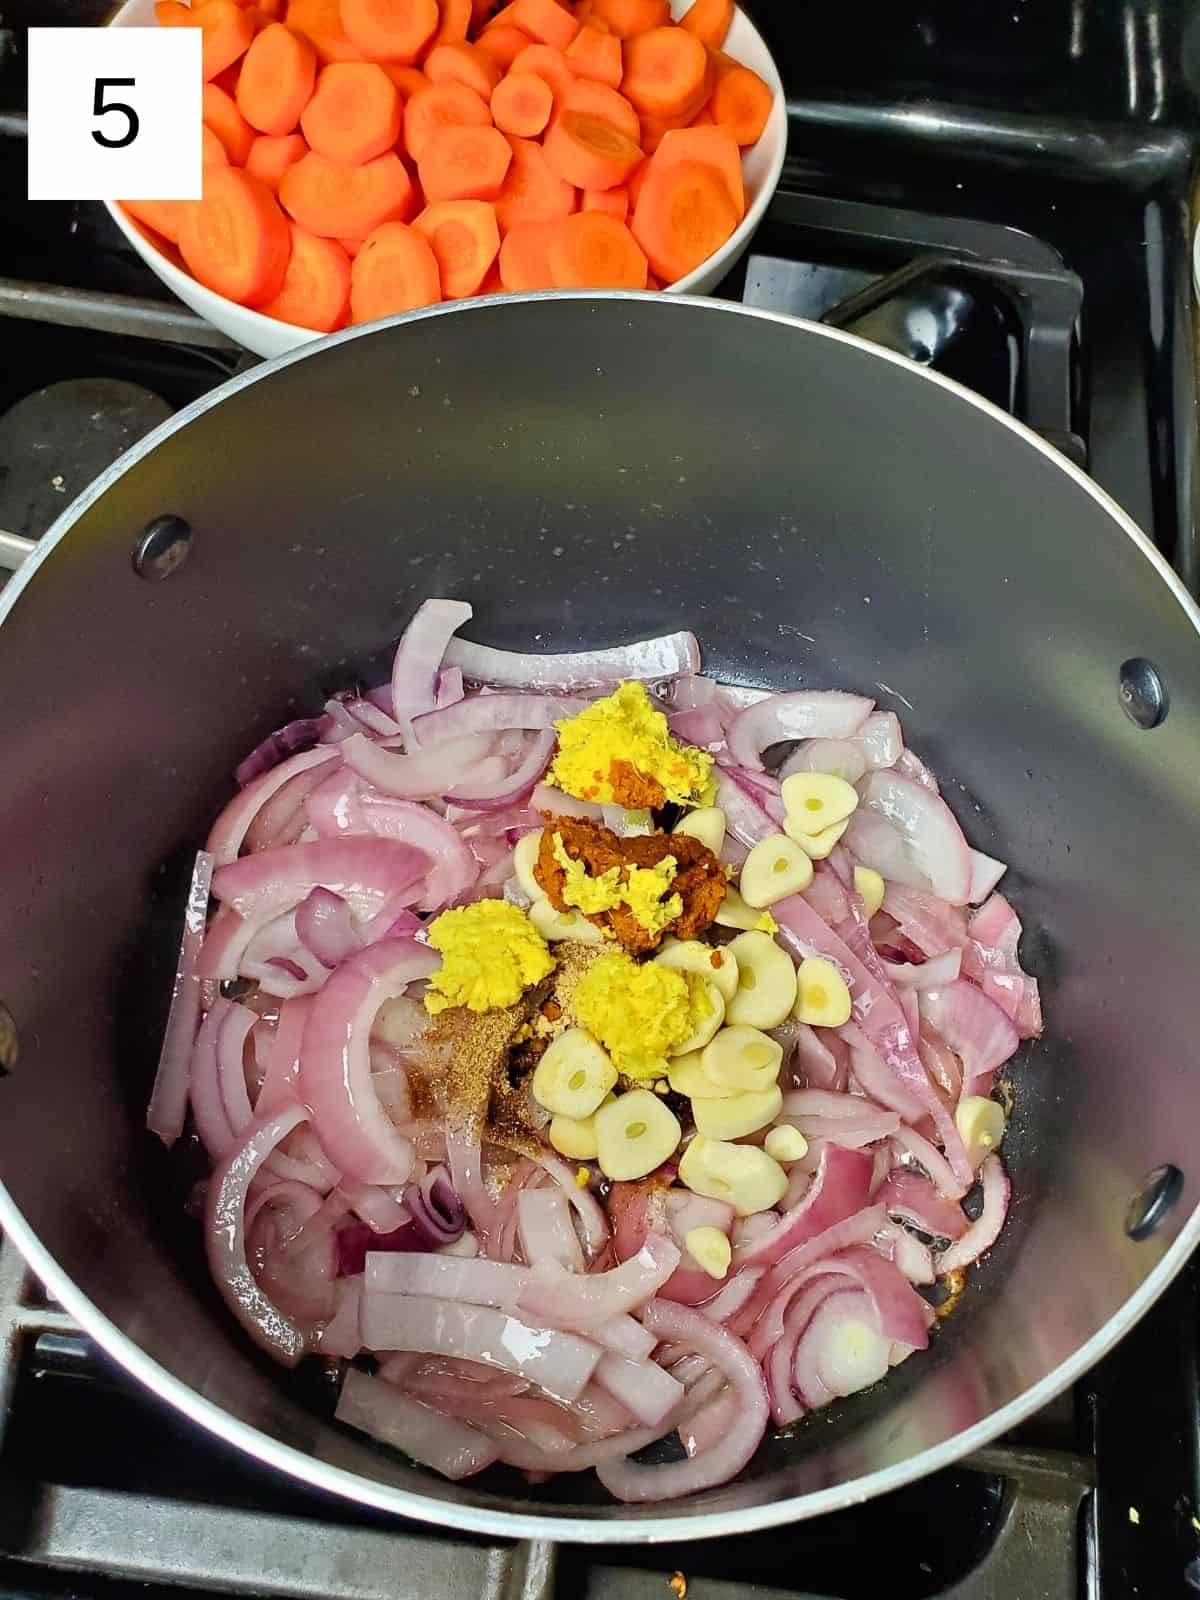 soften chopped onions, and seasonings on top, including garlic, ginger, turmeric, coriander powder, and cumin, in a pot.